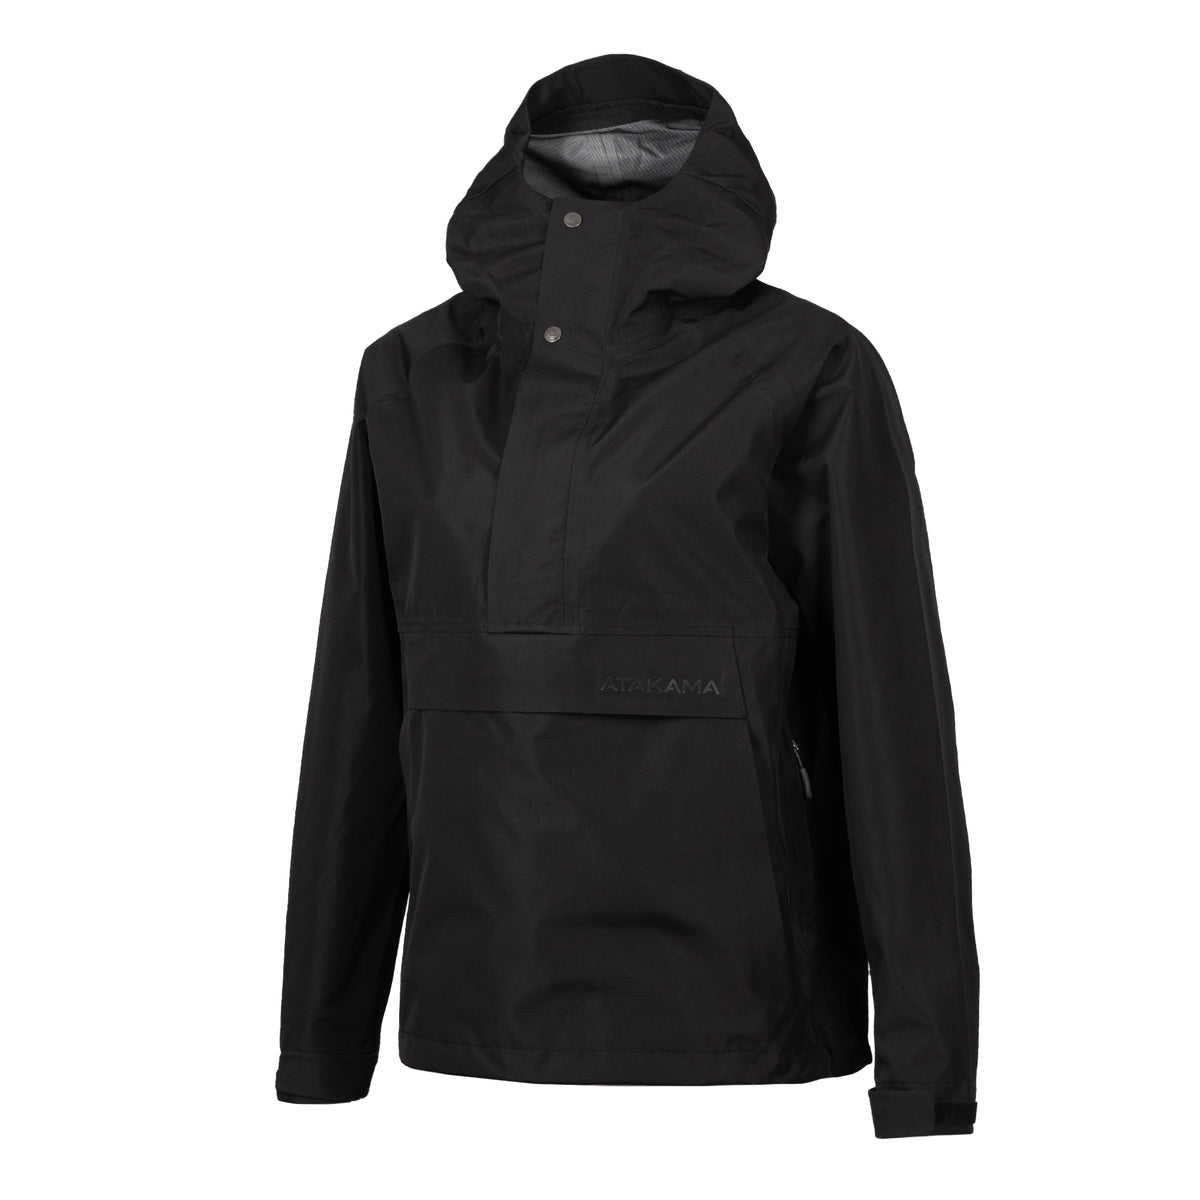 Chaqueta Impermeable mujer anorak Frontera